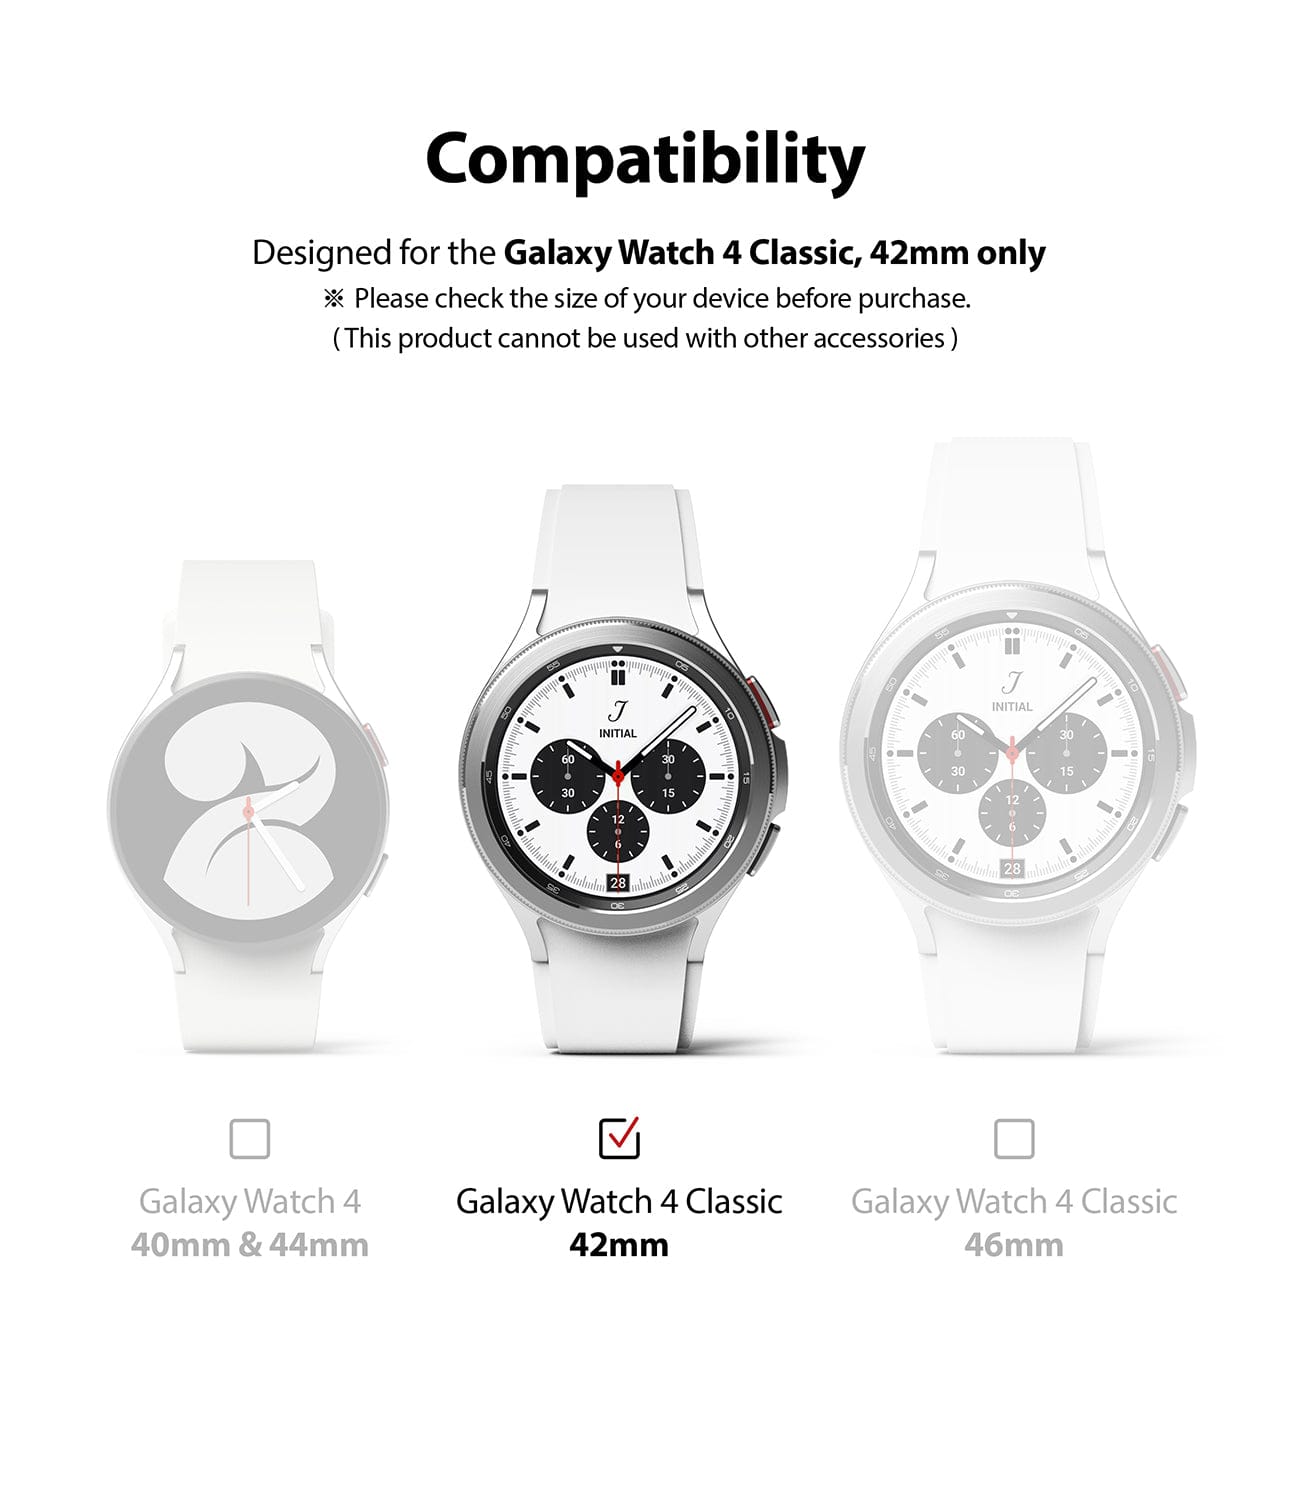 Specifically designed for the Galaxy Watch 4 Classic 42mm.